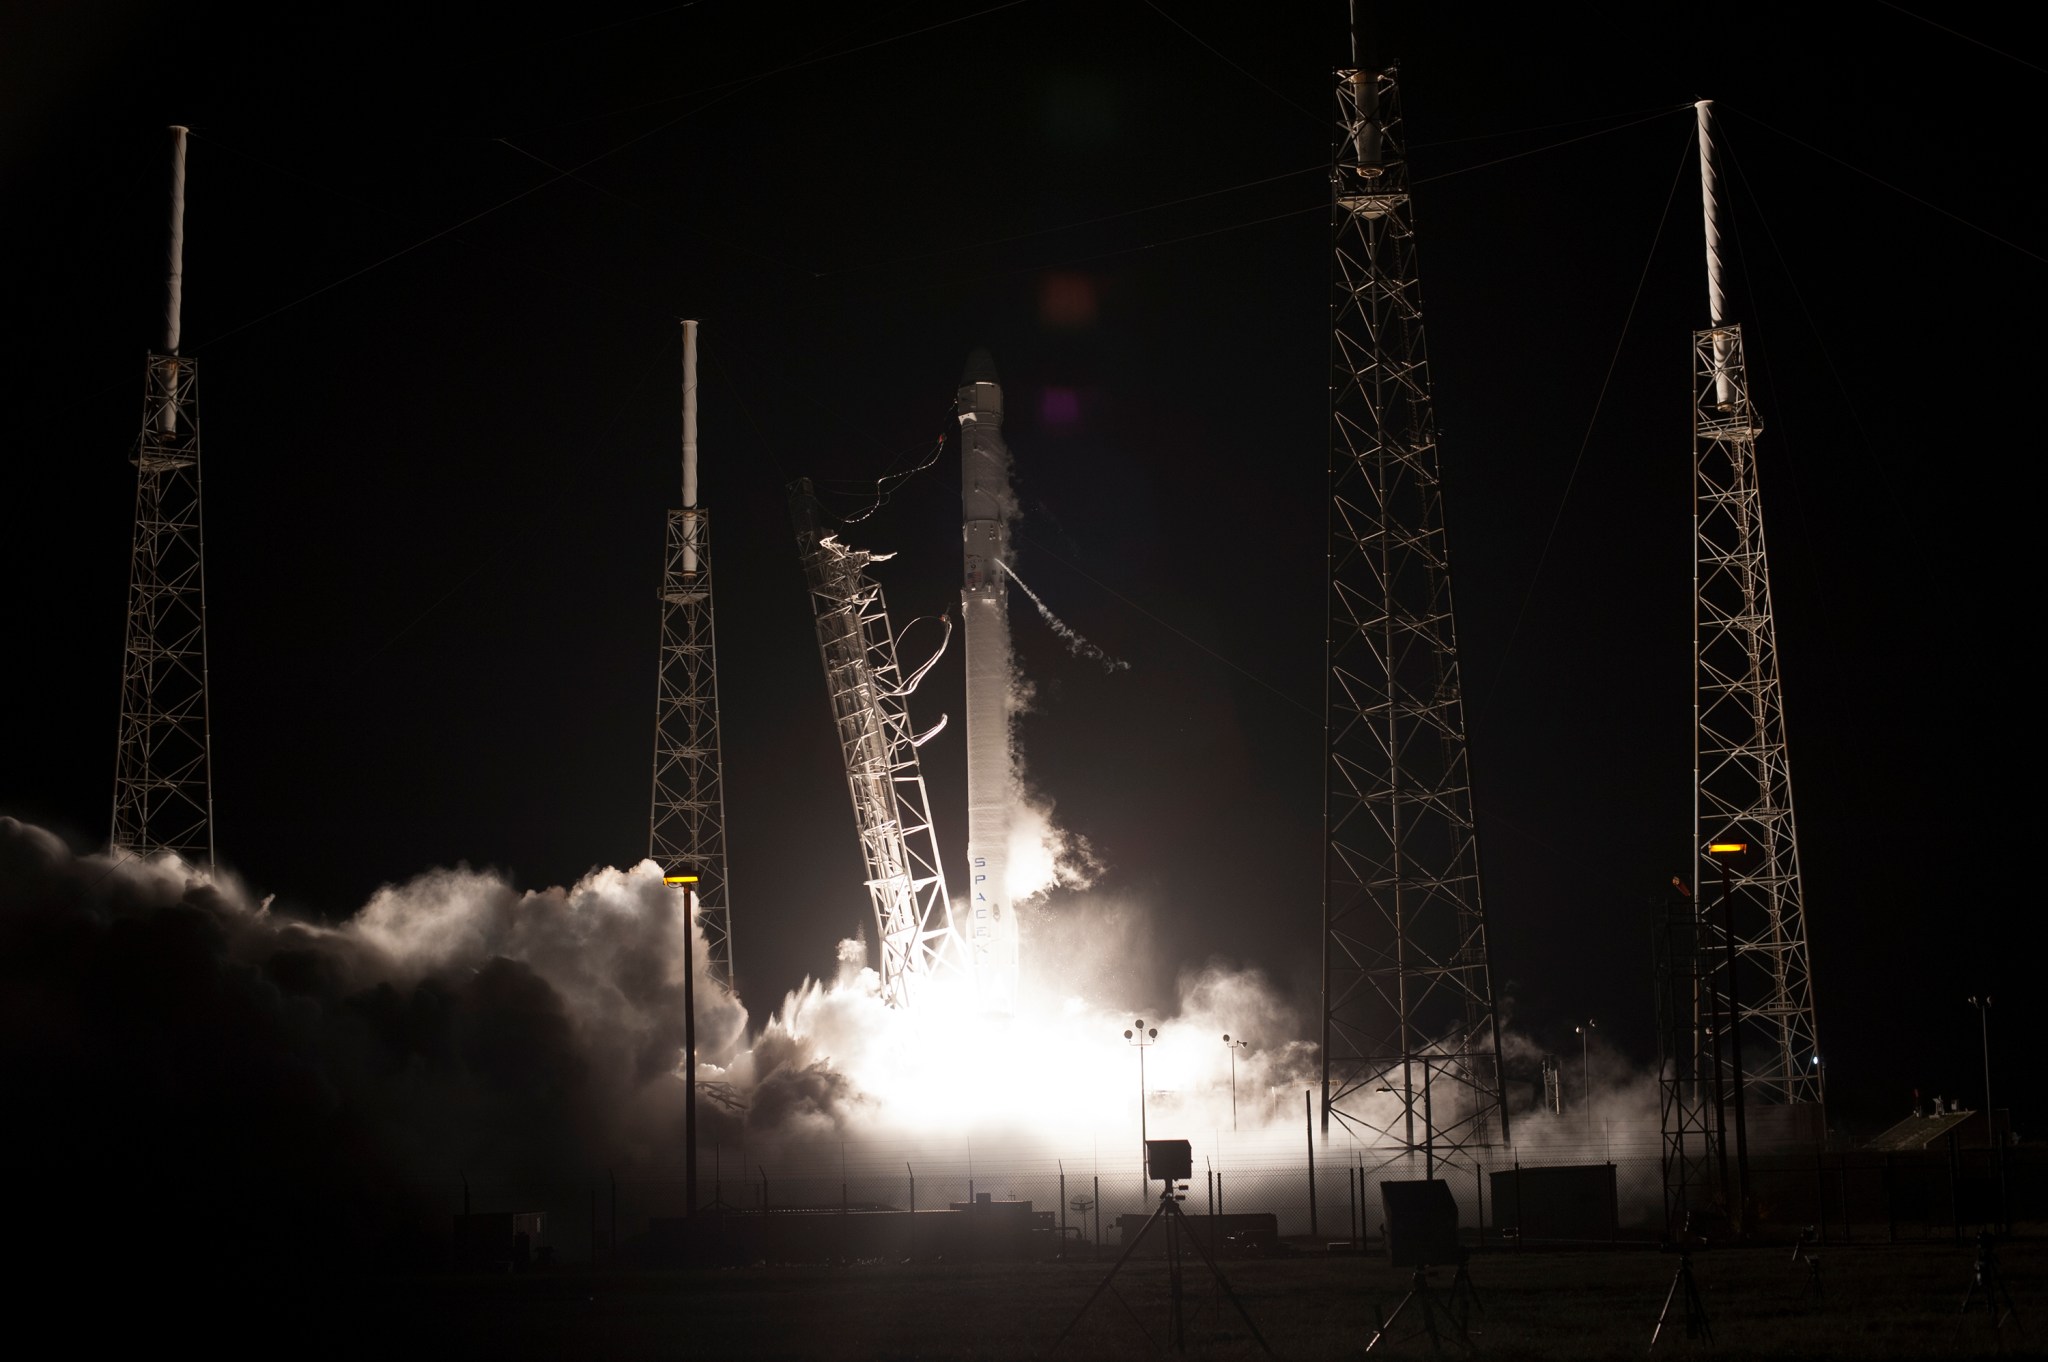 Nighttime launch of Falcon 9 rocket with Dragon capsule aboard